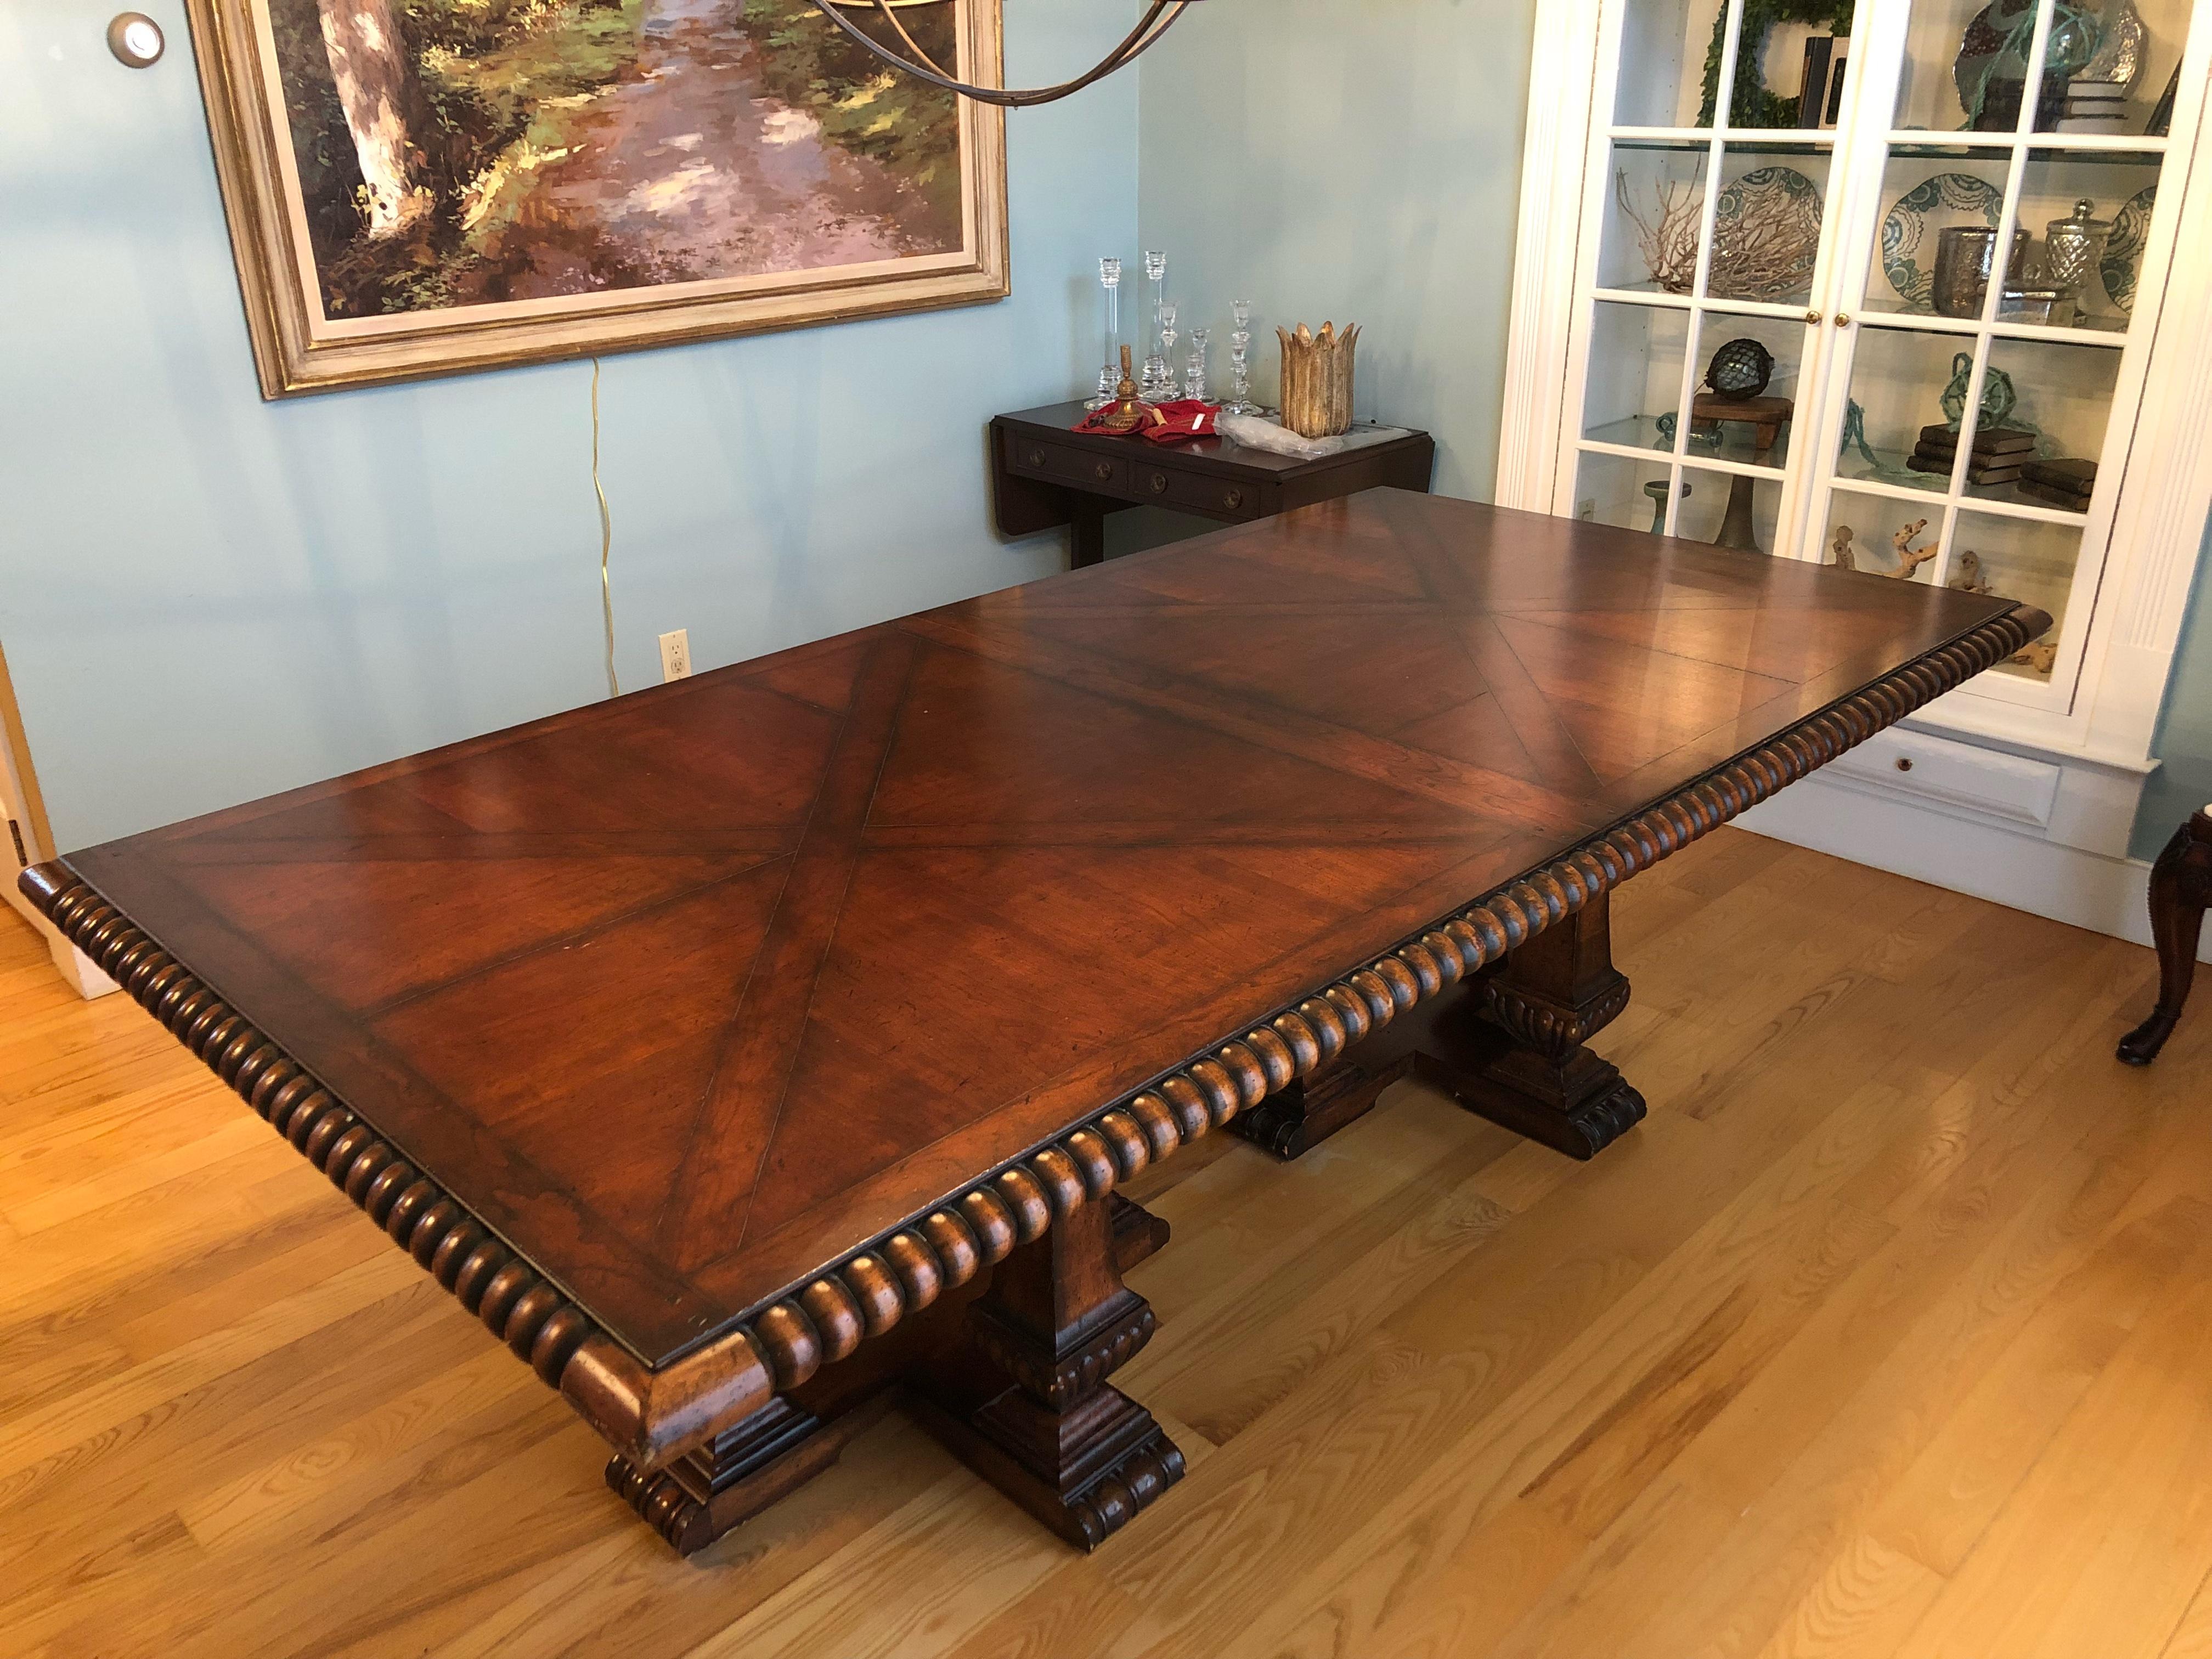 French Provincial style designer mahogany dining table having a parquetry inlaid huge rectangular top with barley twist molded edges on top of four pedestals on each end, each in the form of an obelisk mounted on a fluted urn.
Two leaves that